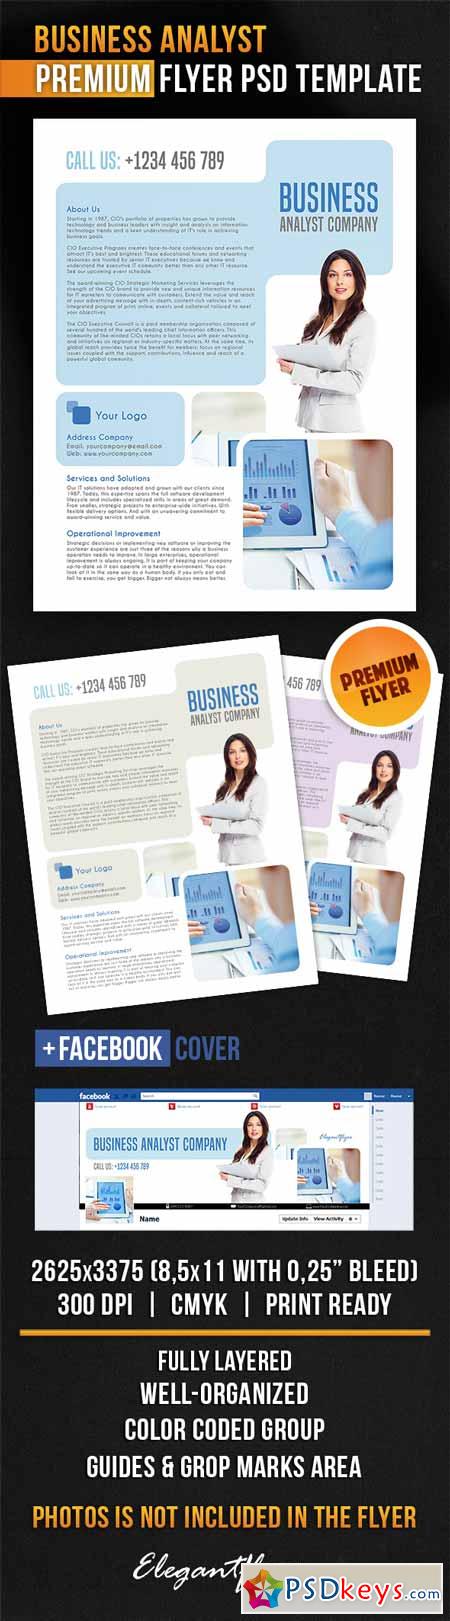 Business Analyst  Flyer PSD Template + Facebook Cover